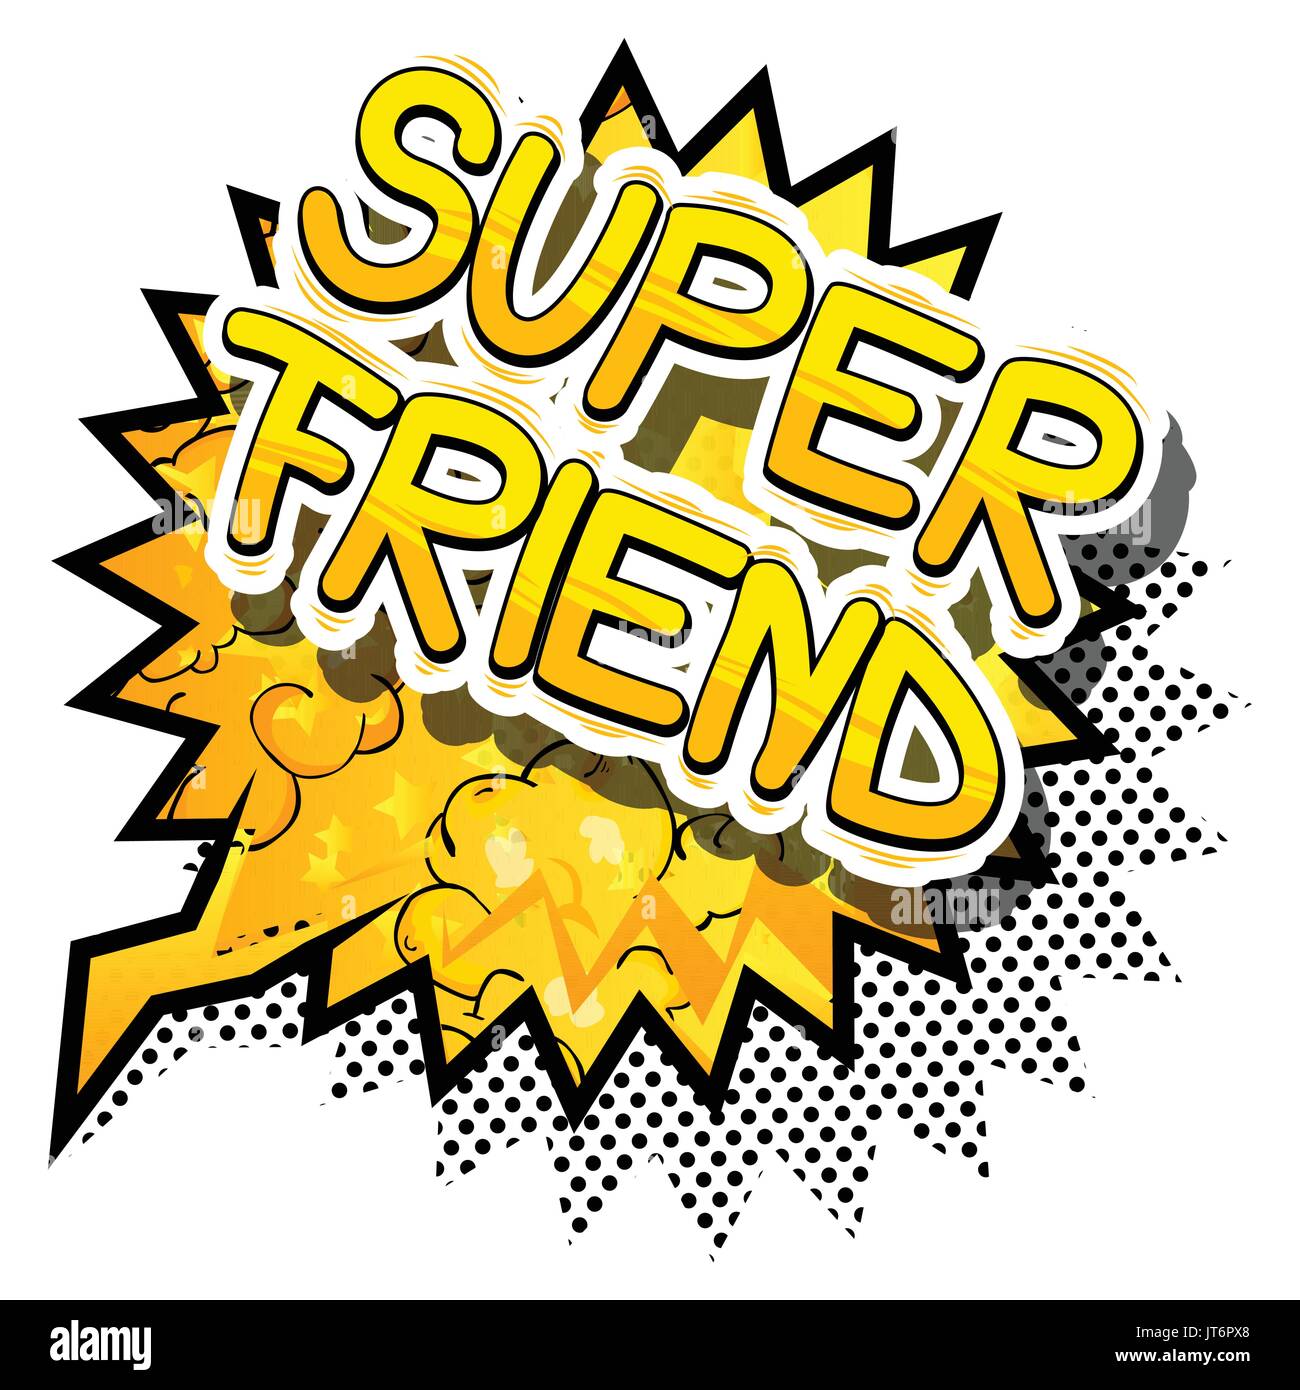 Super Friend - Comic book style phrase on abstract background. Stock Vector